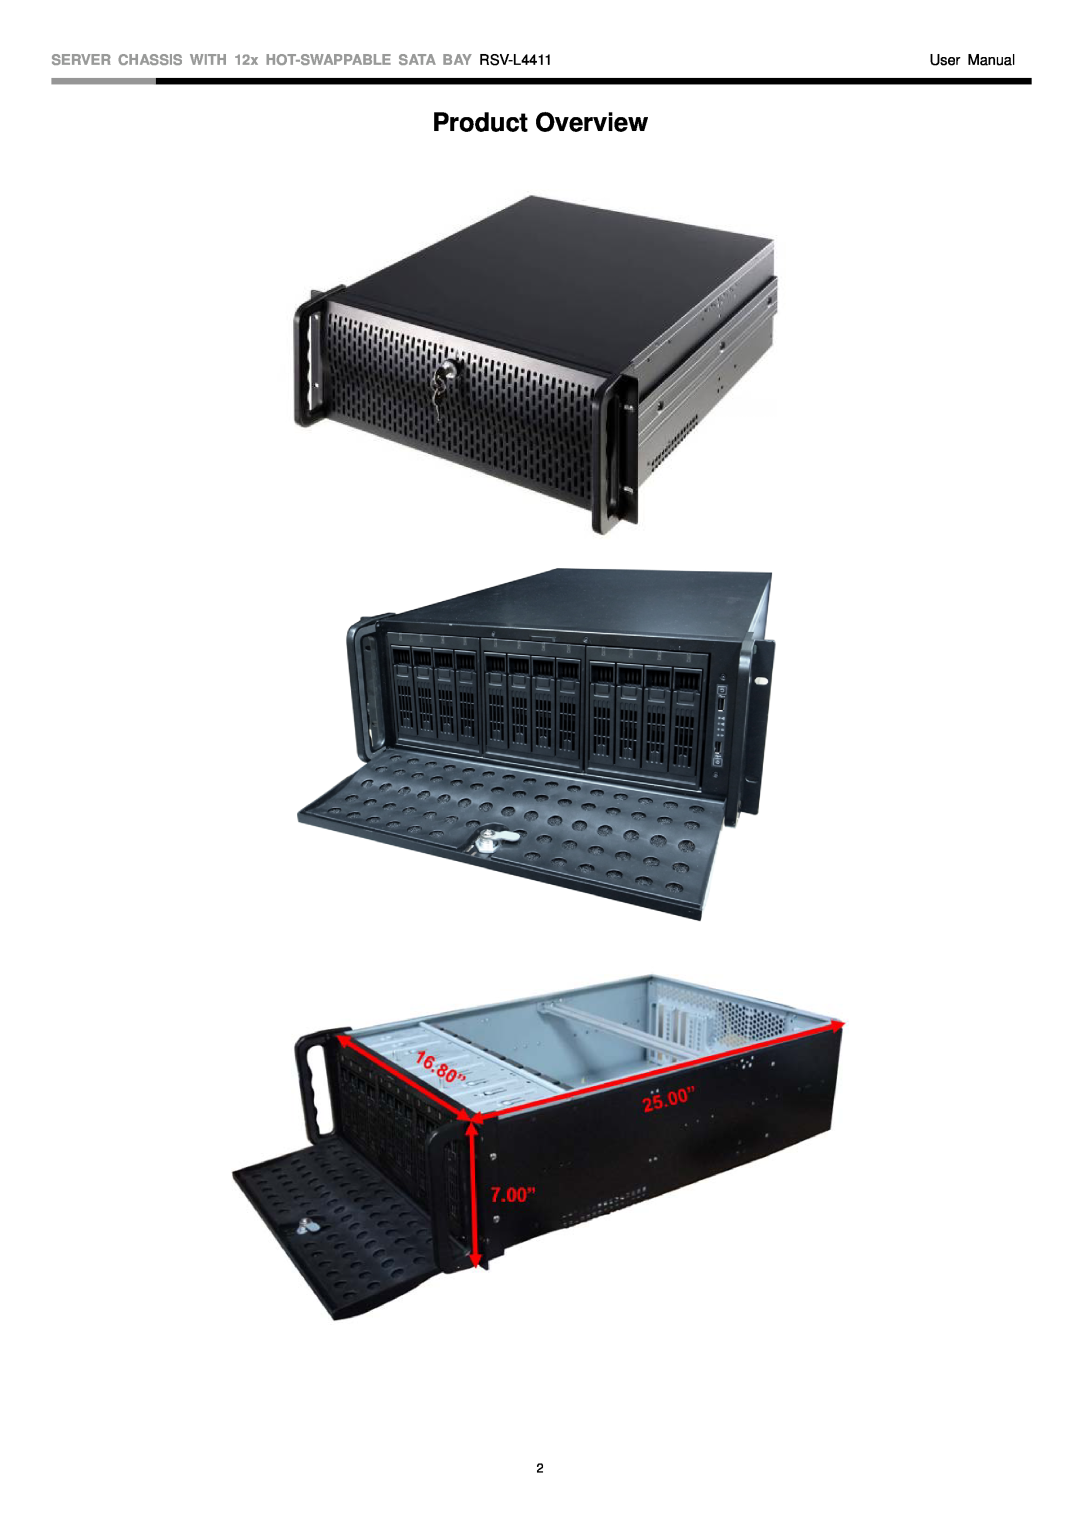 Rosewill user manual Product Overview, SERVER CHASSIS WITH 12x HOT-SWAPPABLE SATA BAY RSV-L4411, User Manual 